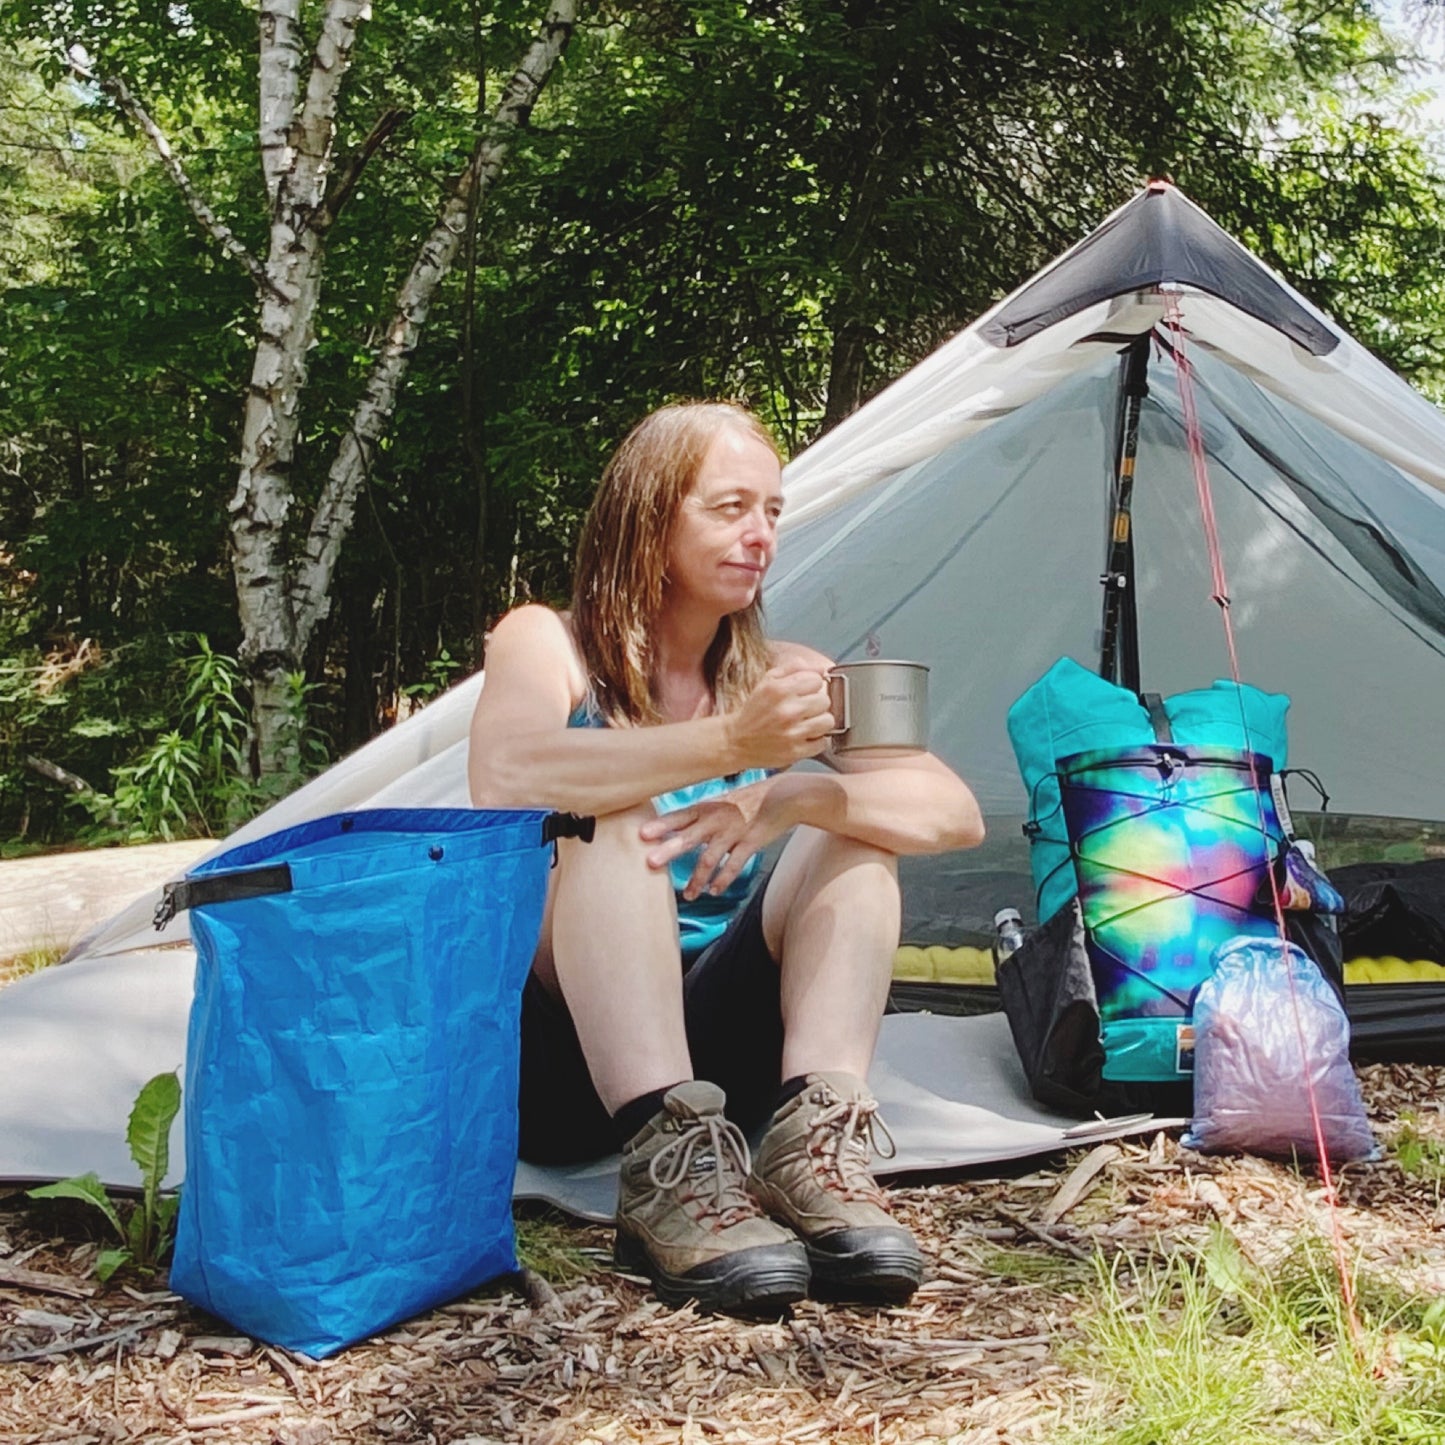 Woman sitting in front of tent holding/drinking from a titanium pot